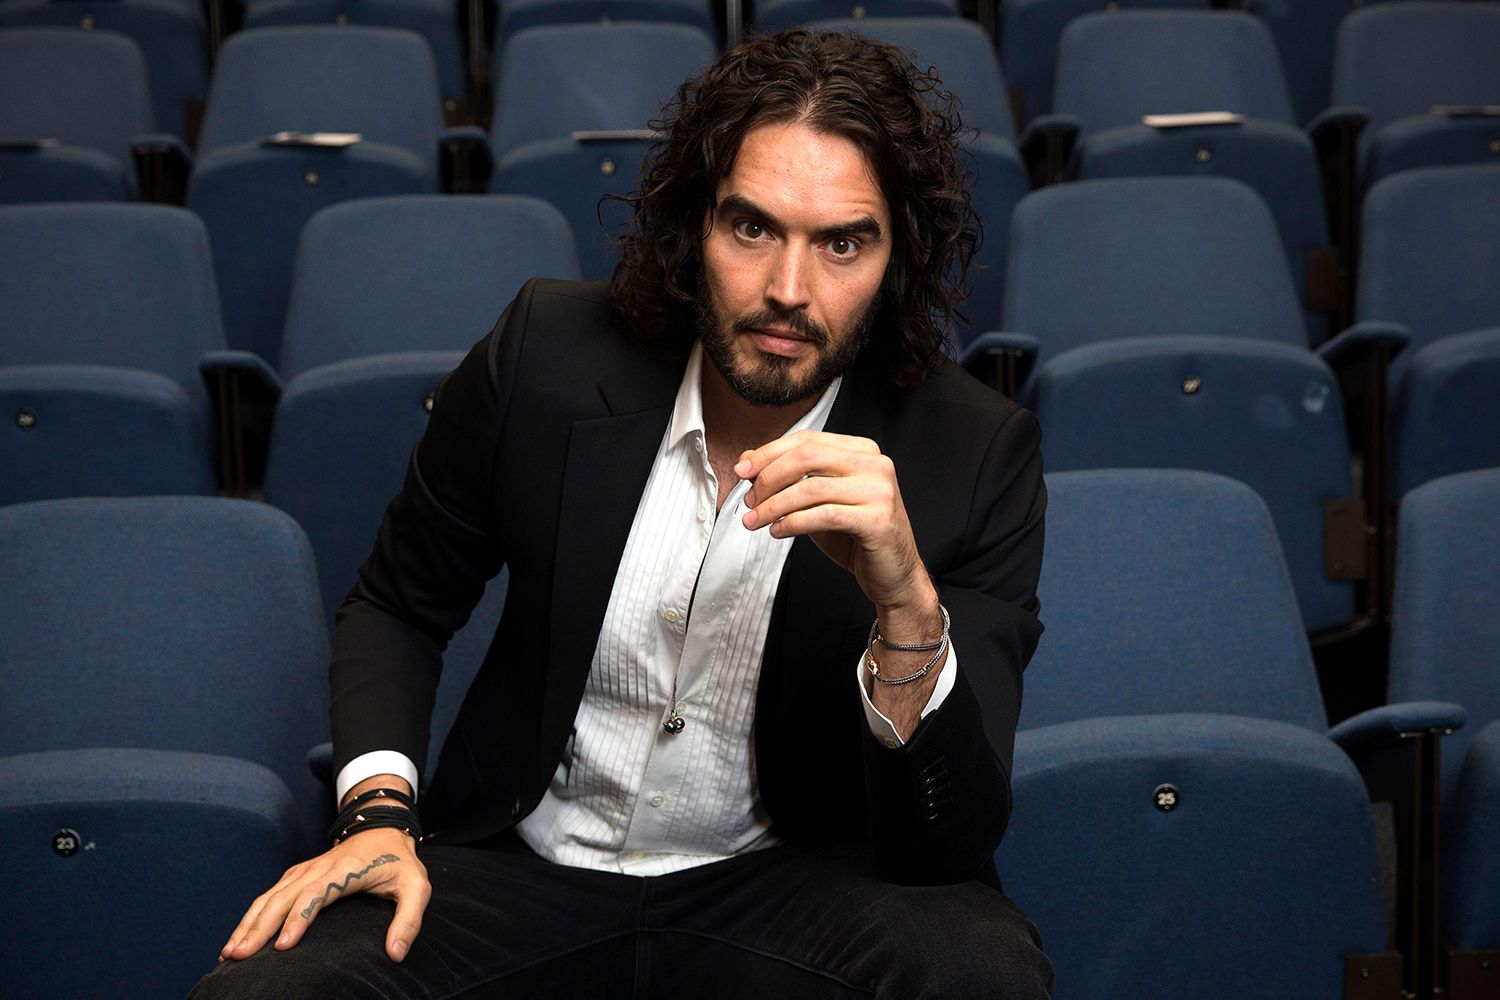 Russell Brand Accused Of Rape, Sexual Assaults And Emotional Abuse